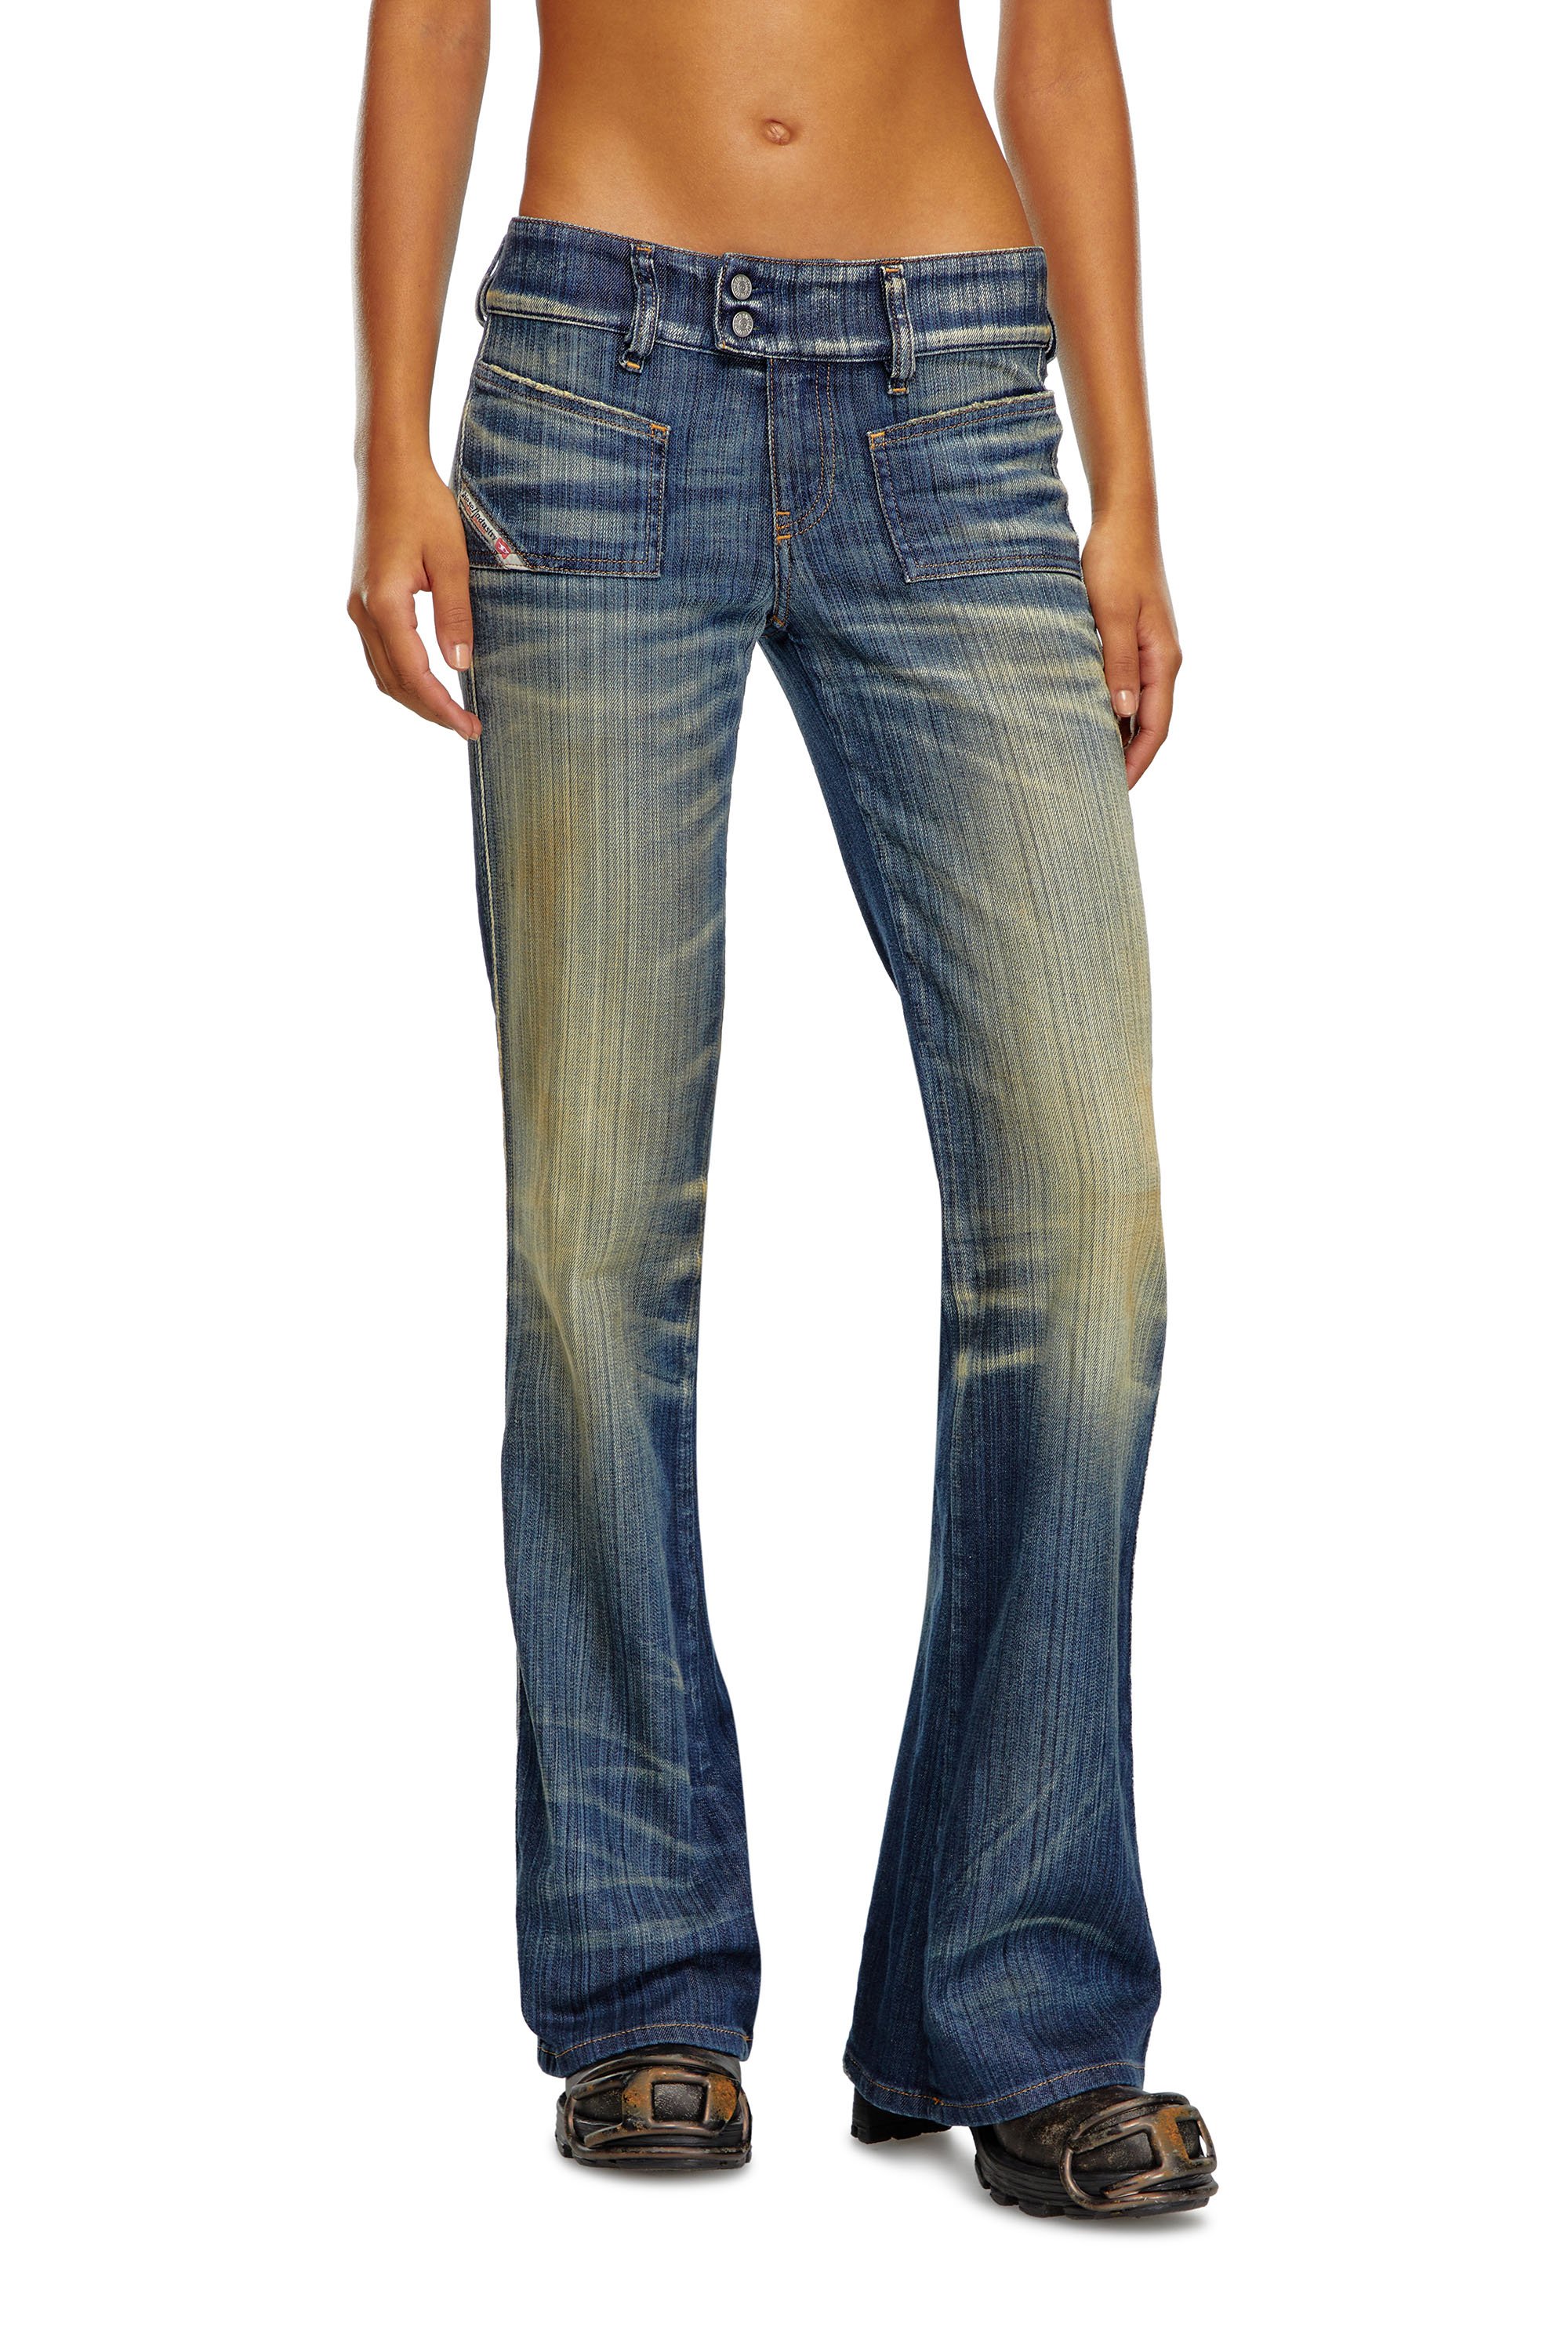 Diesel - Bootcut and Flare Jeans D-Hush 09J46, Mujer Bootcut y Flare Jeans - D-Hush in Azul marino - Image 2